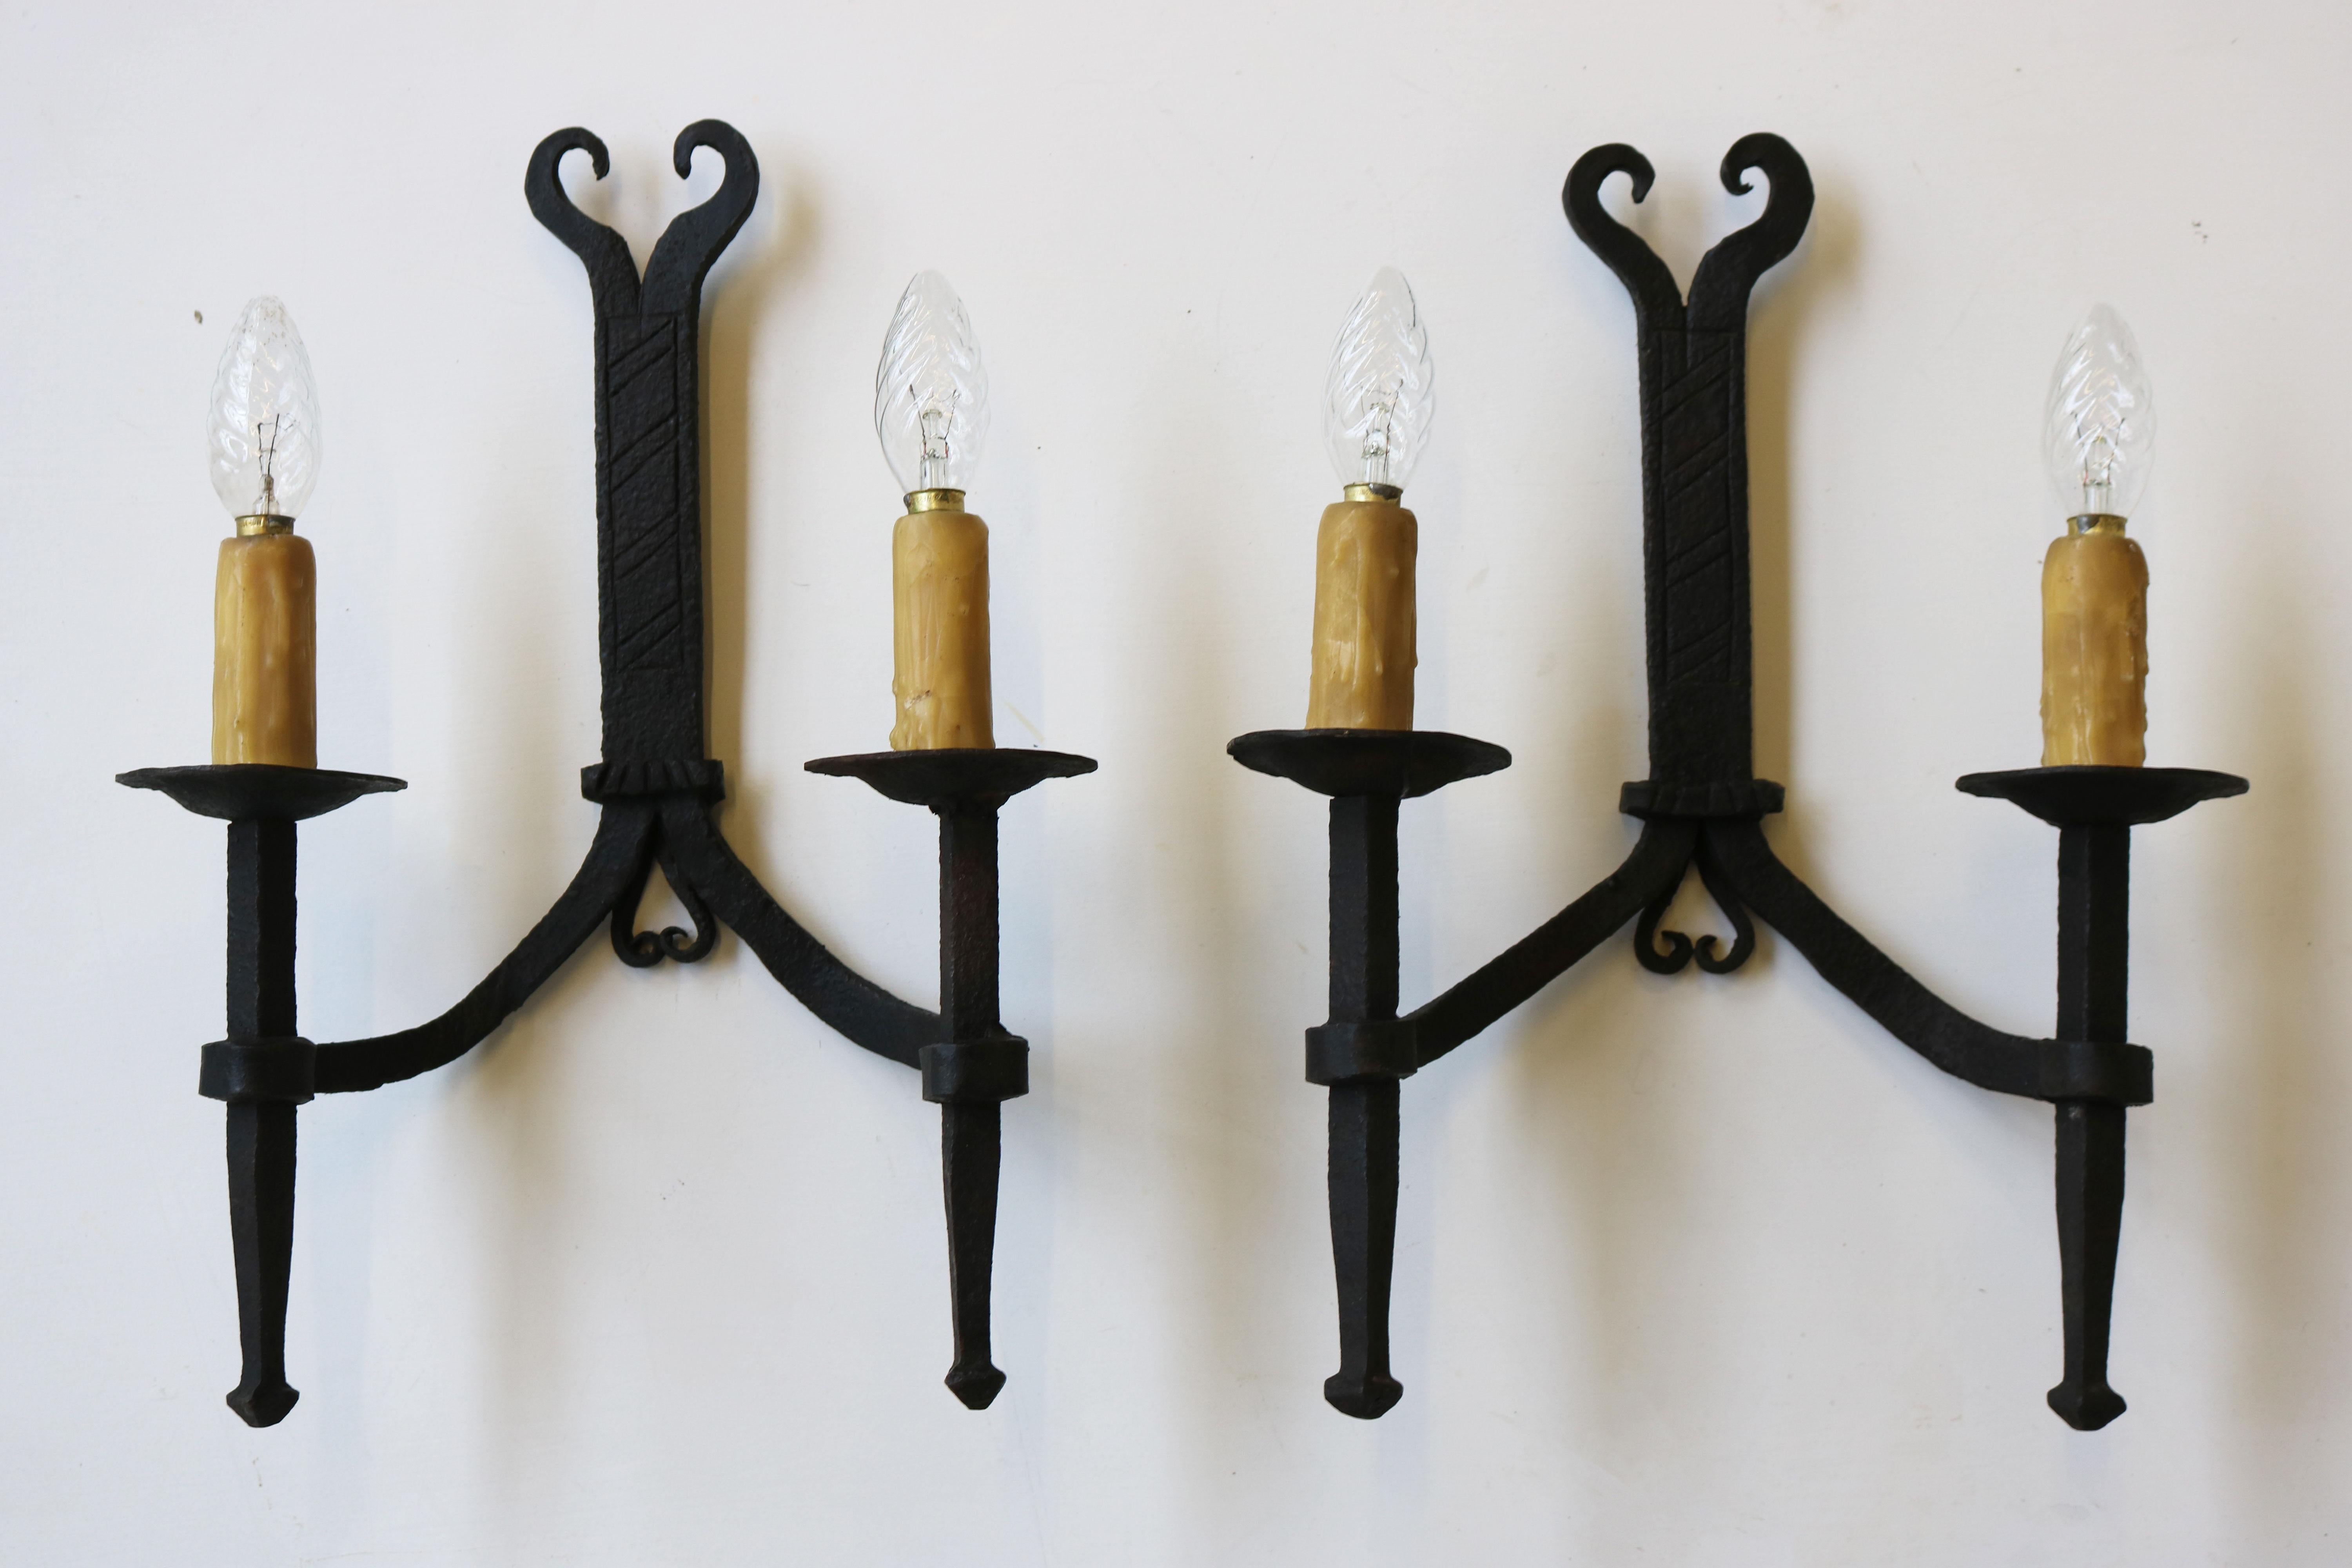 Early 20th Century Antique Wrought Iron Wall Lights / Sconces 1900 Spanish Style Arts & Crafts